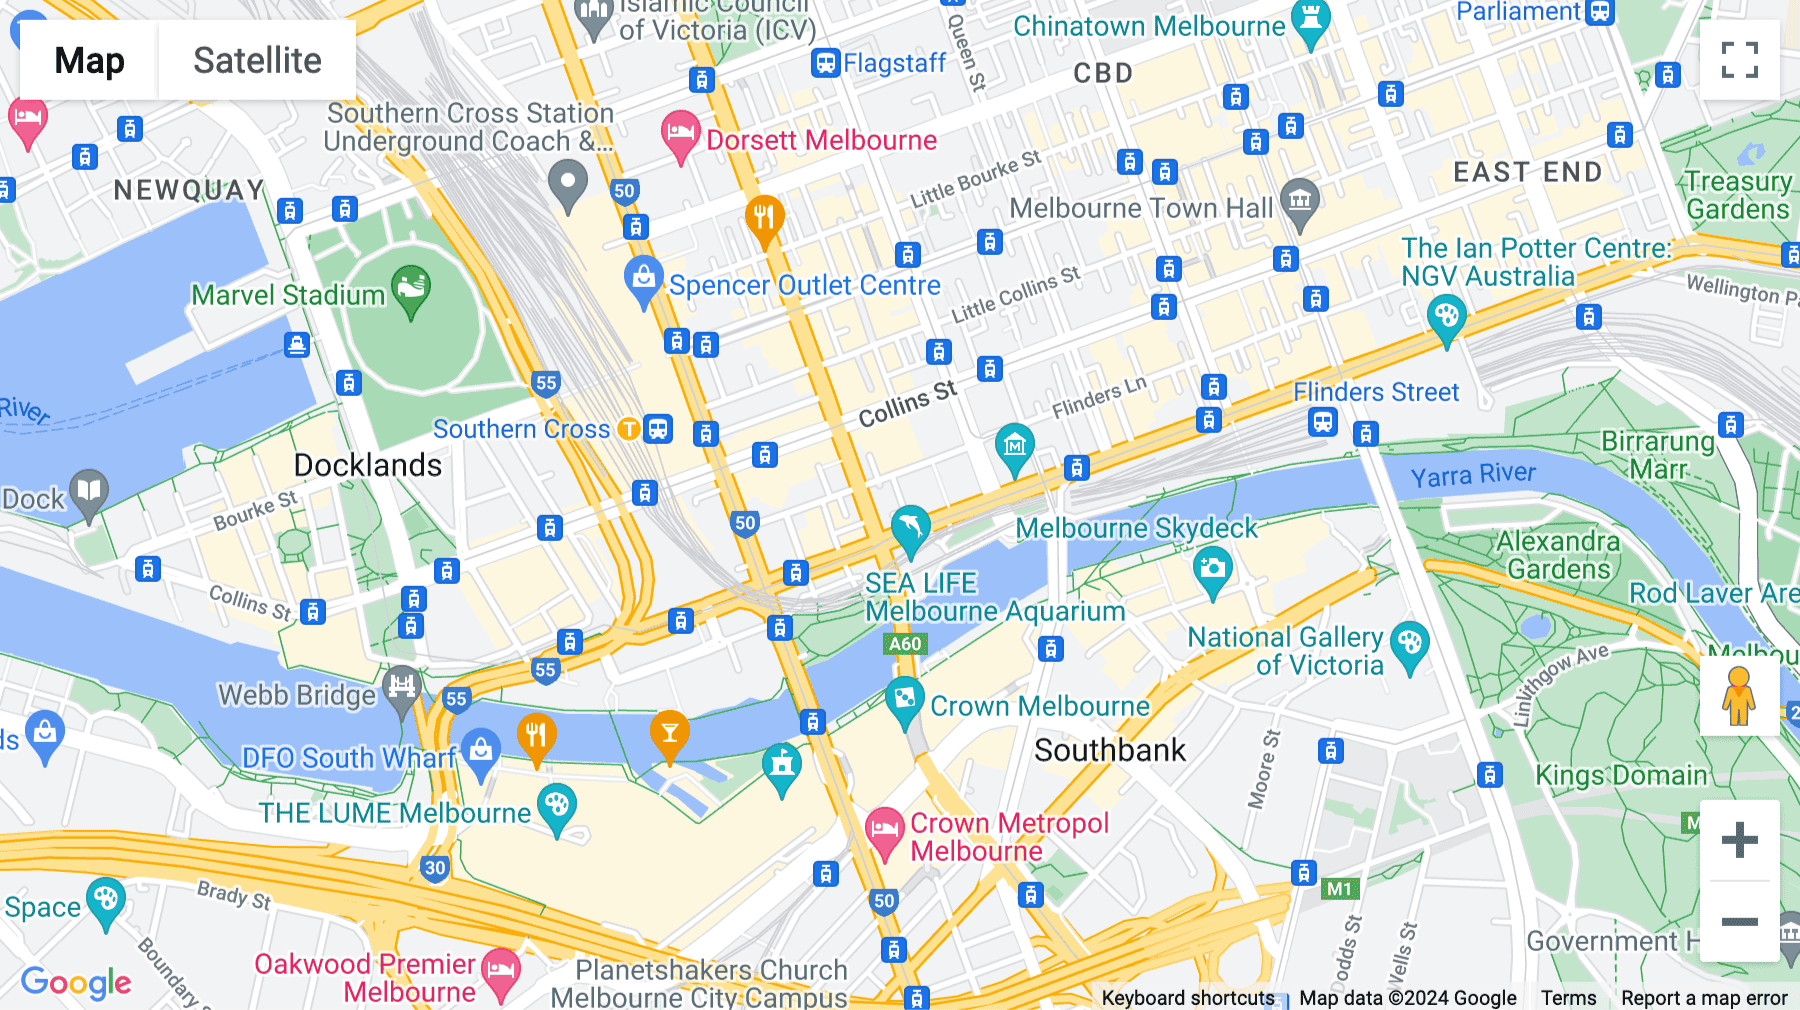 Click for interative map of 25 King Street, Melbourne CBD, Melbourne